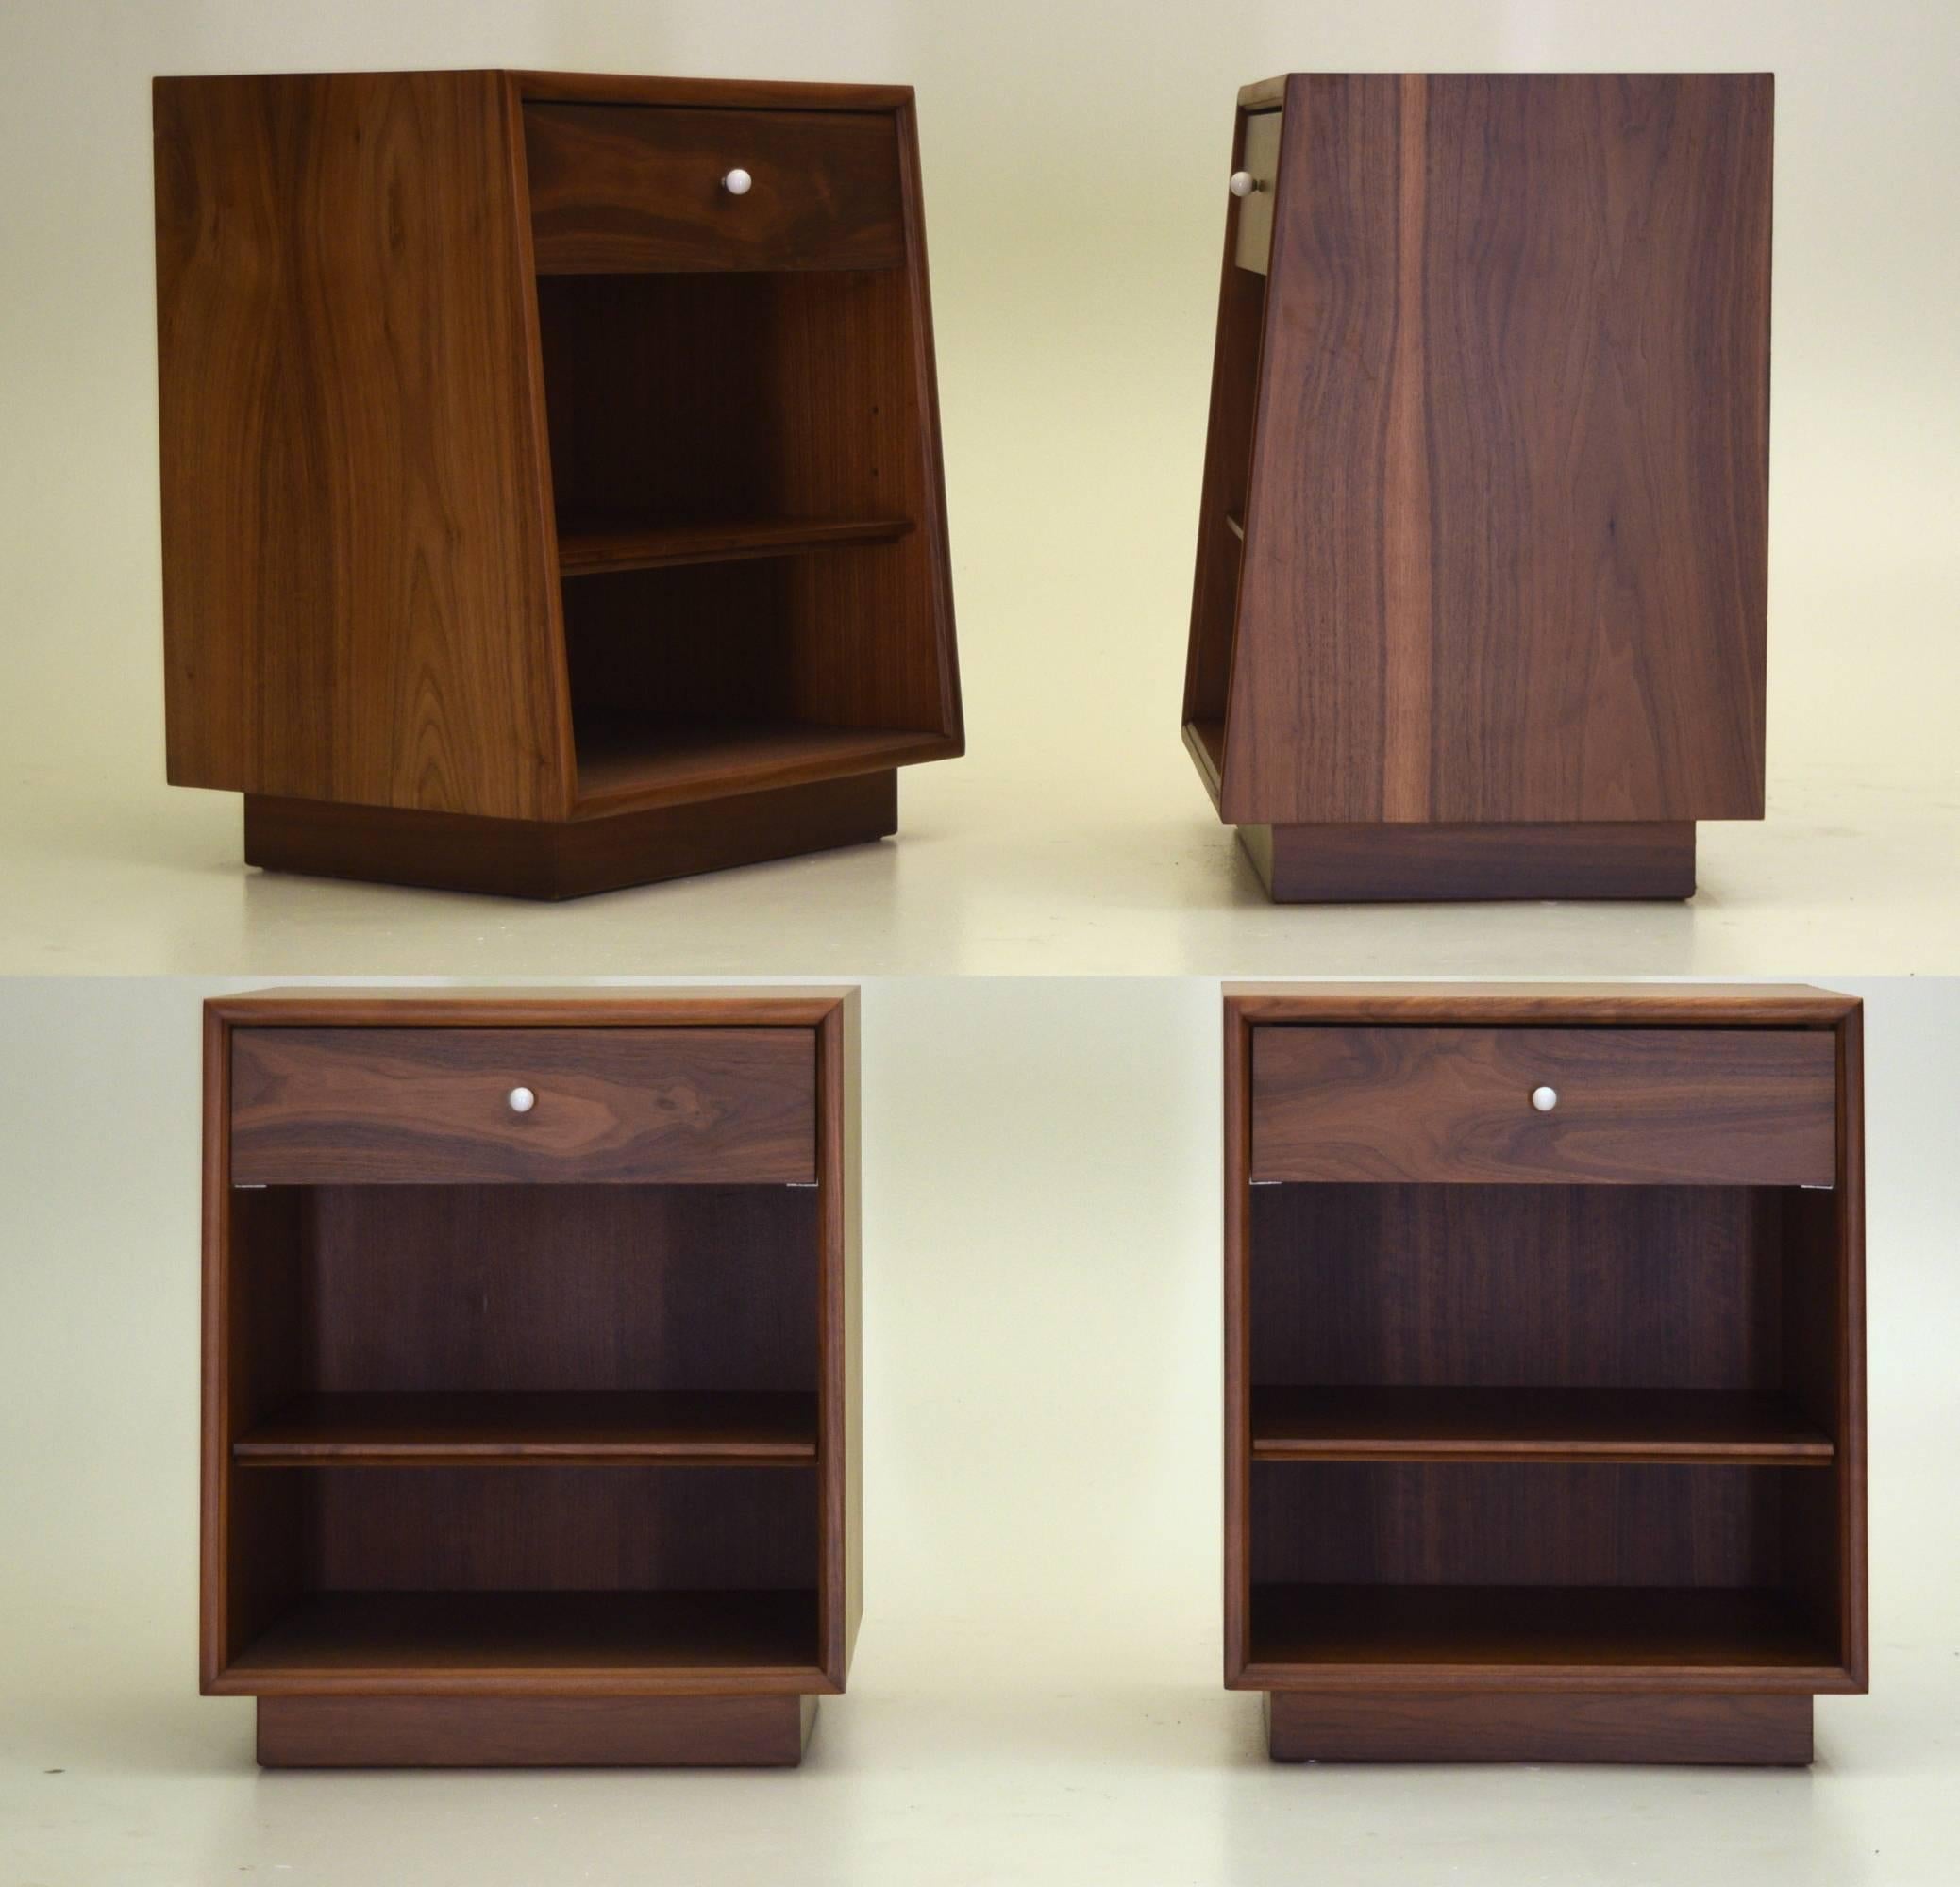 Entirely refinished and in excellent condition, we are pleased to offer this entire suite designed by Kipp Stewart for Drexel in the late 1950s. Particular attention to the quality of walnut used was emphasized by Kipp which included solid lumber